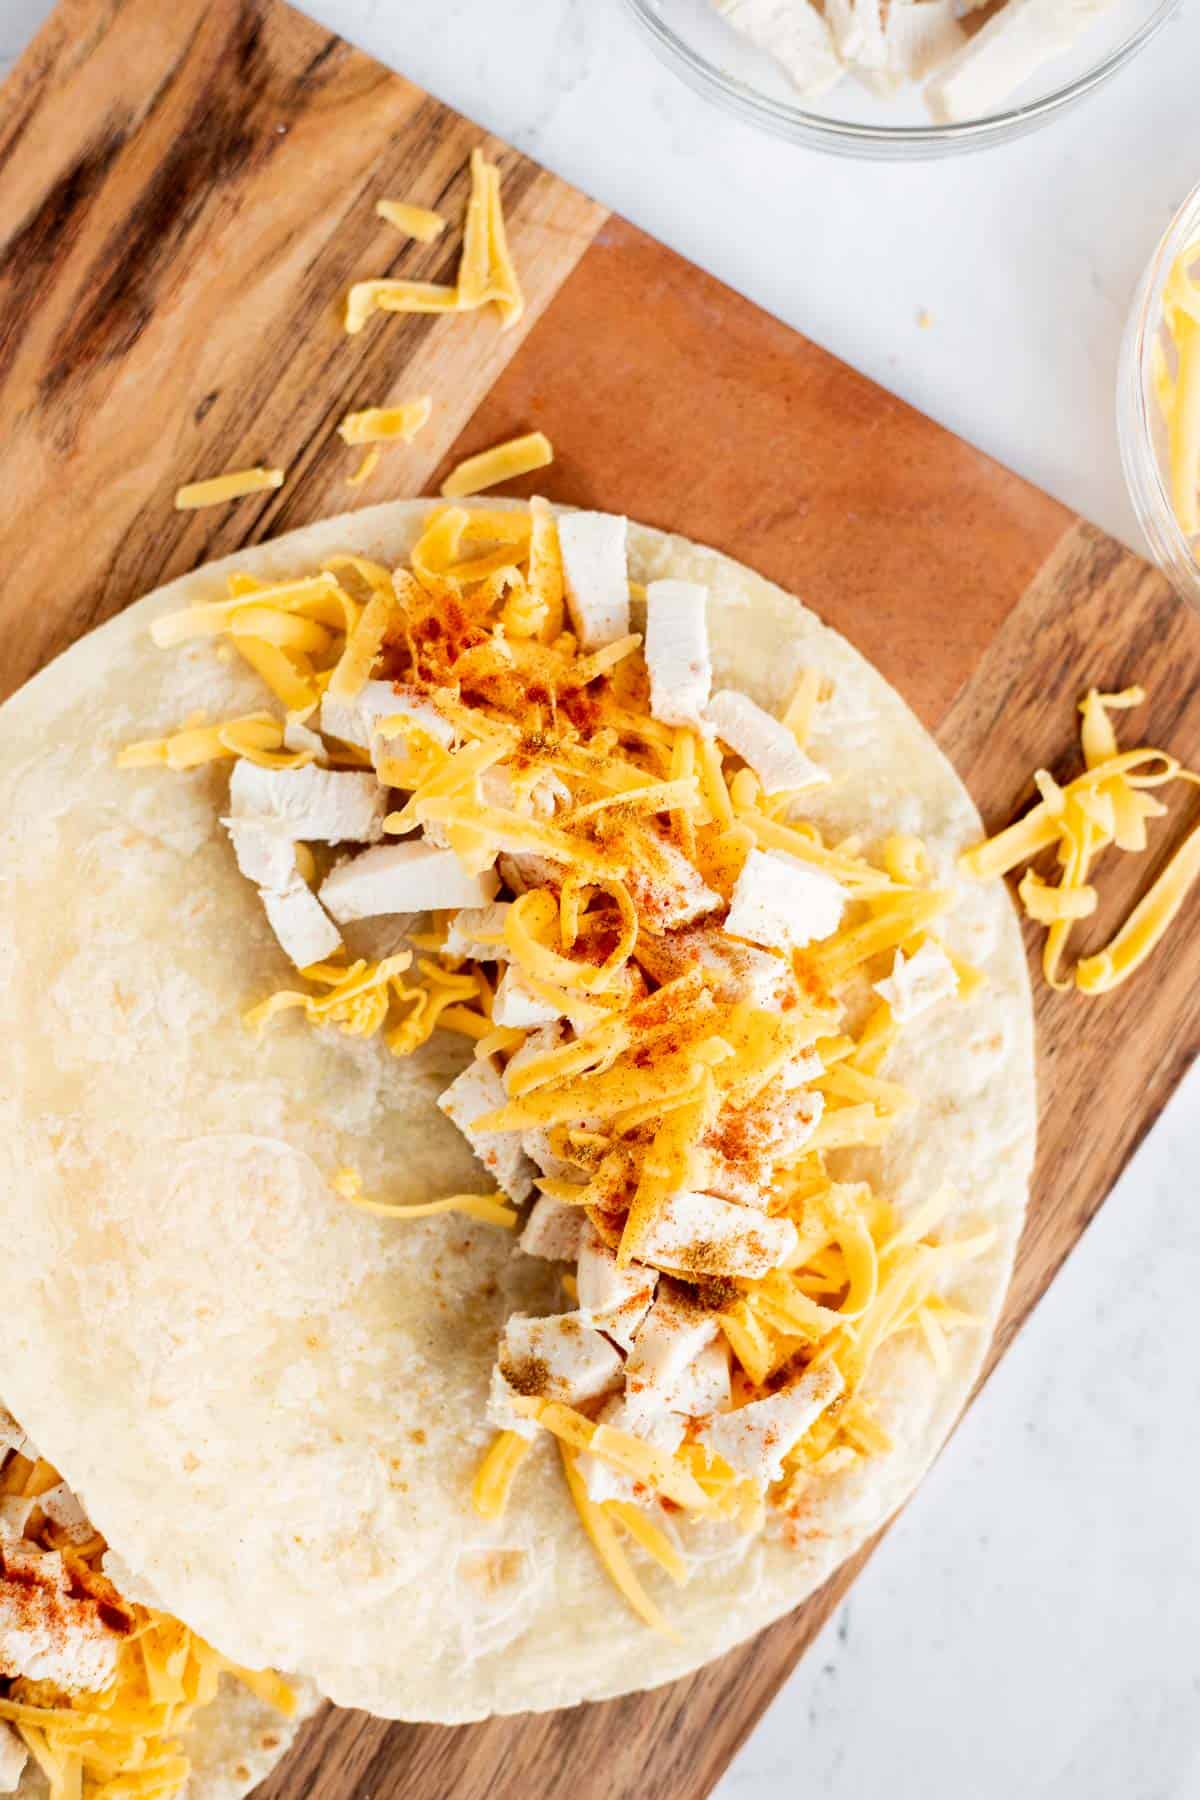 flour tortilla with half covered in shredded cheese and diced chicken.